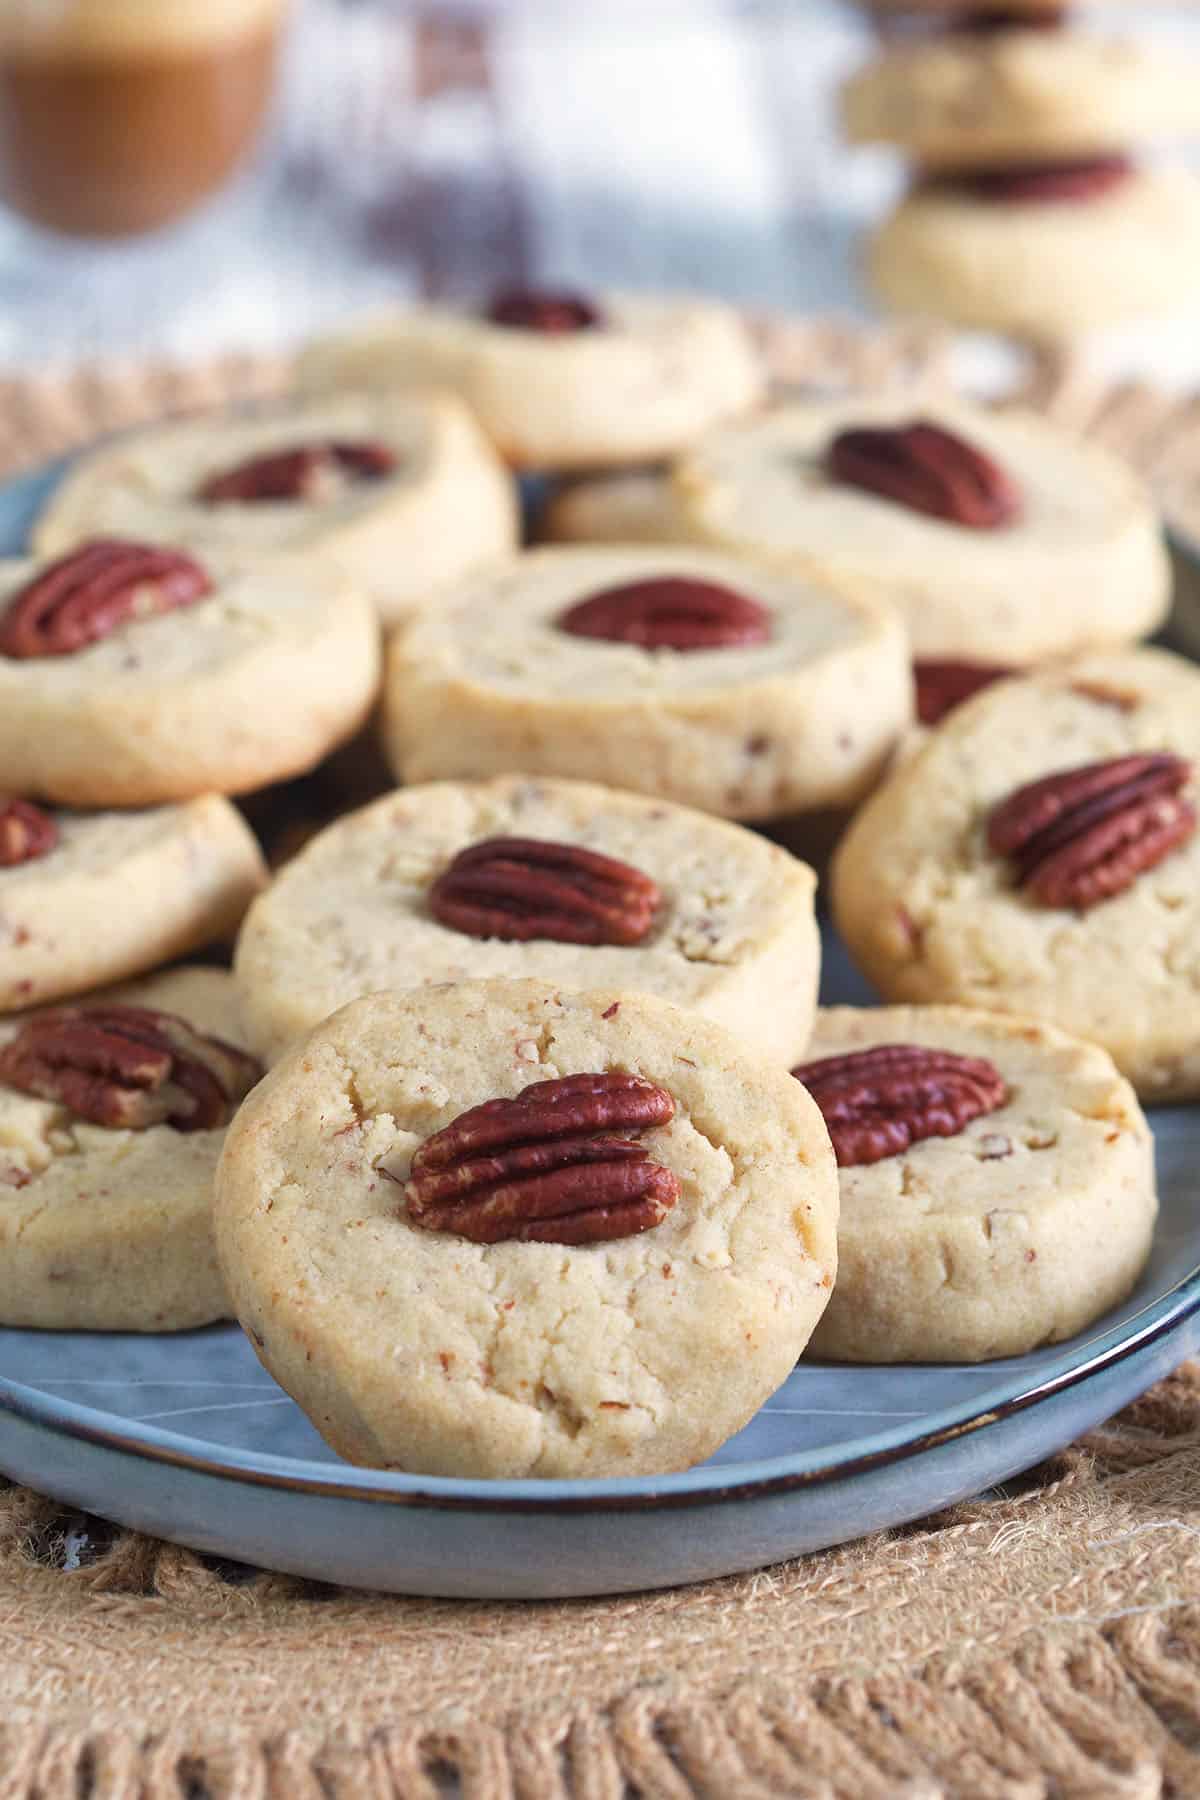 A large batch of pecan sandies is presented on an oval shaped platter.